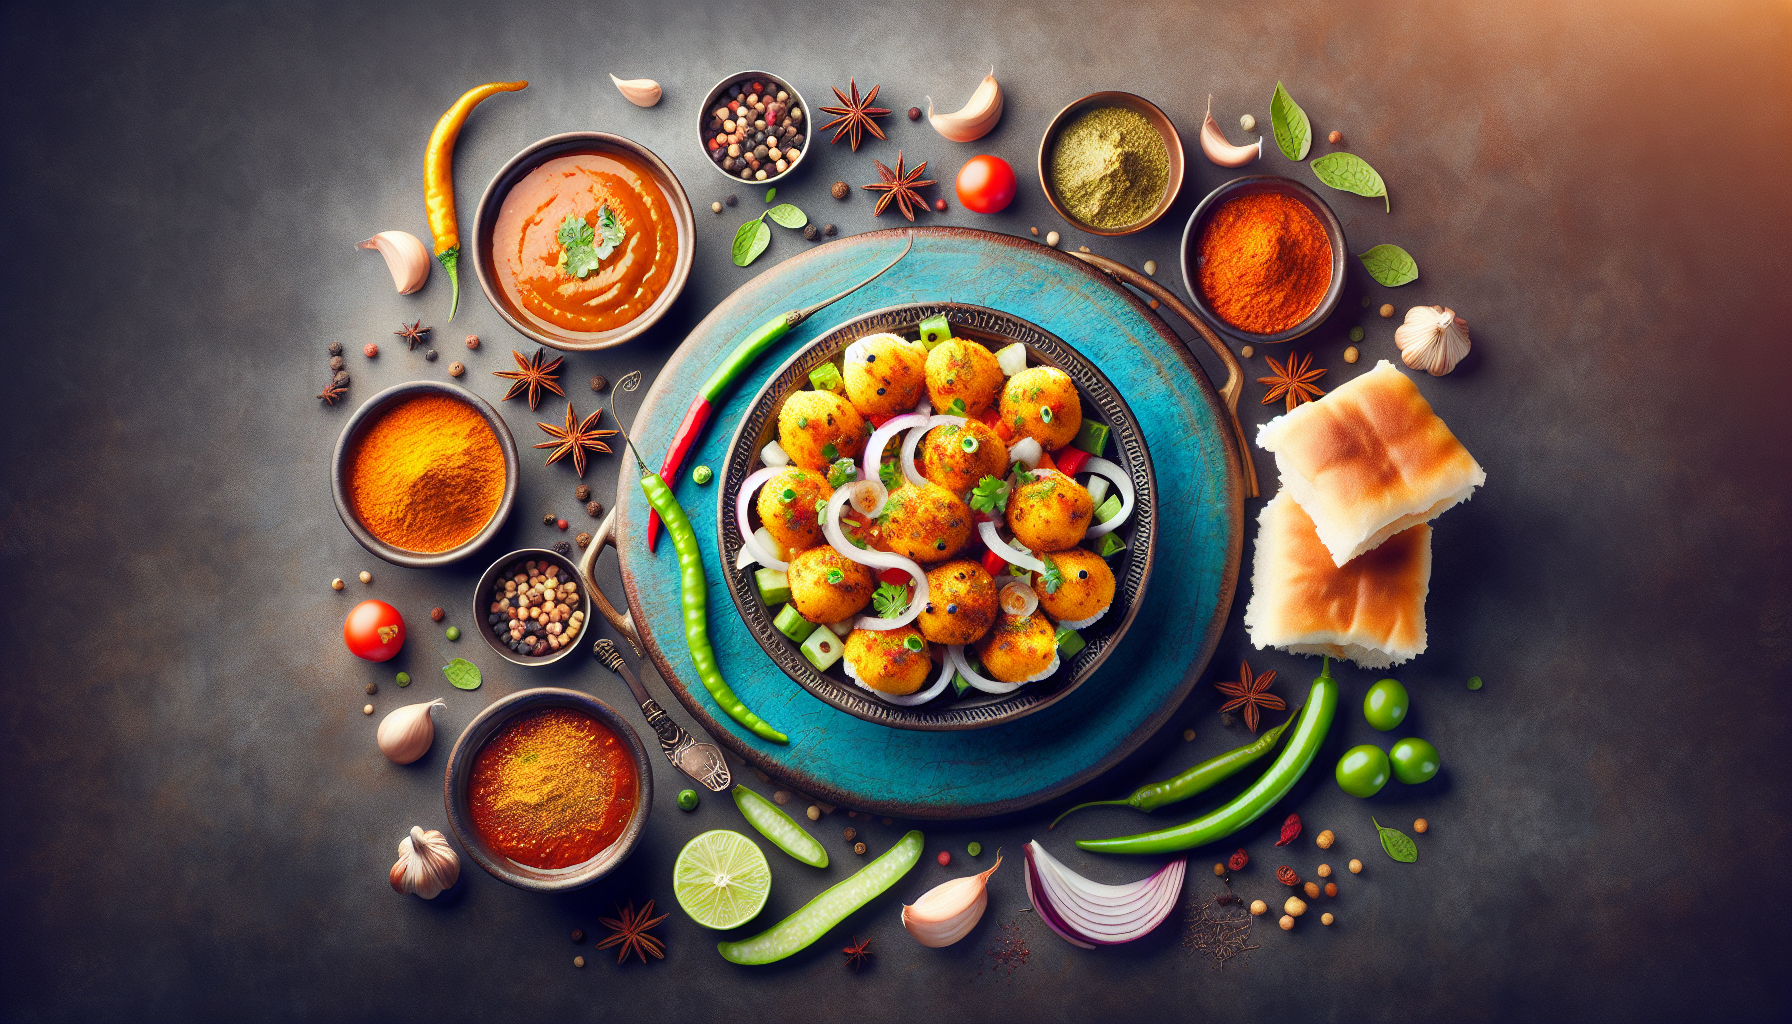 Share Your Take On A Classic Indian Street Food Snack.